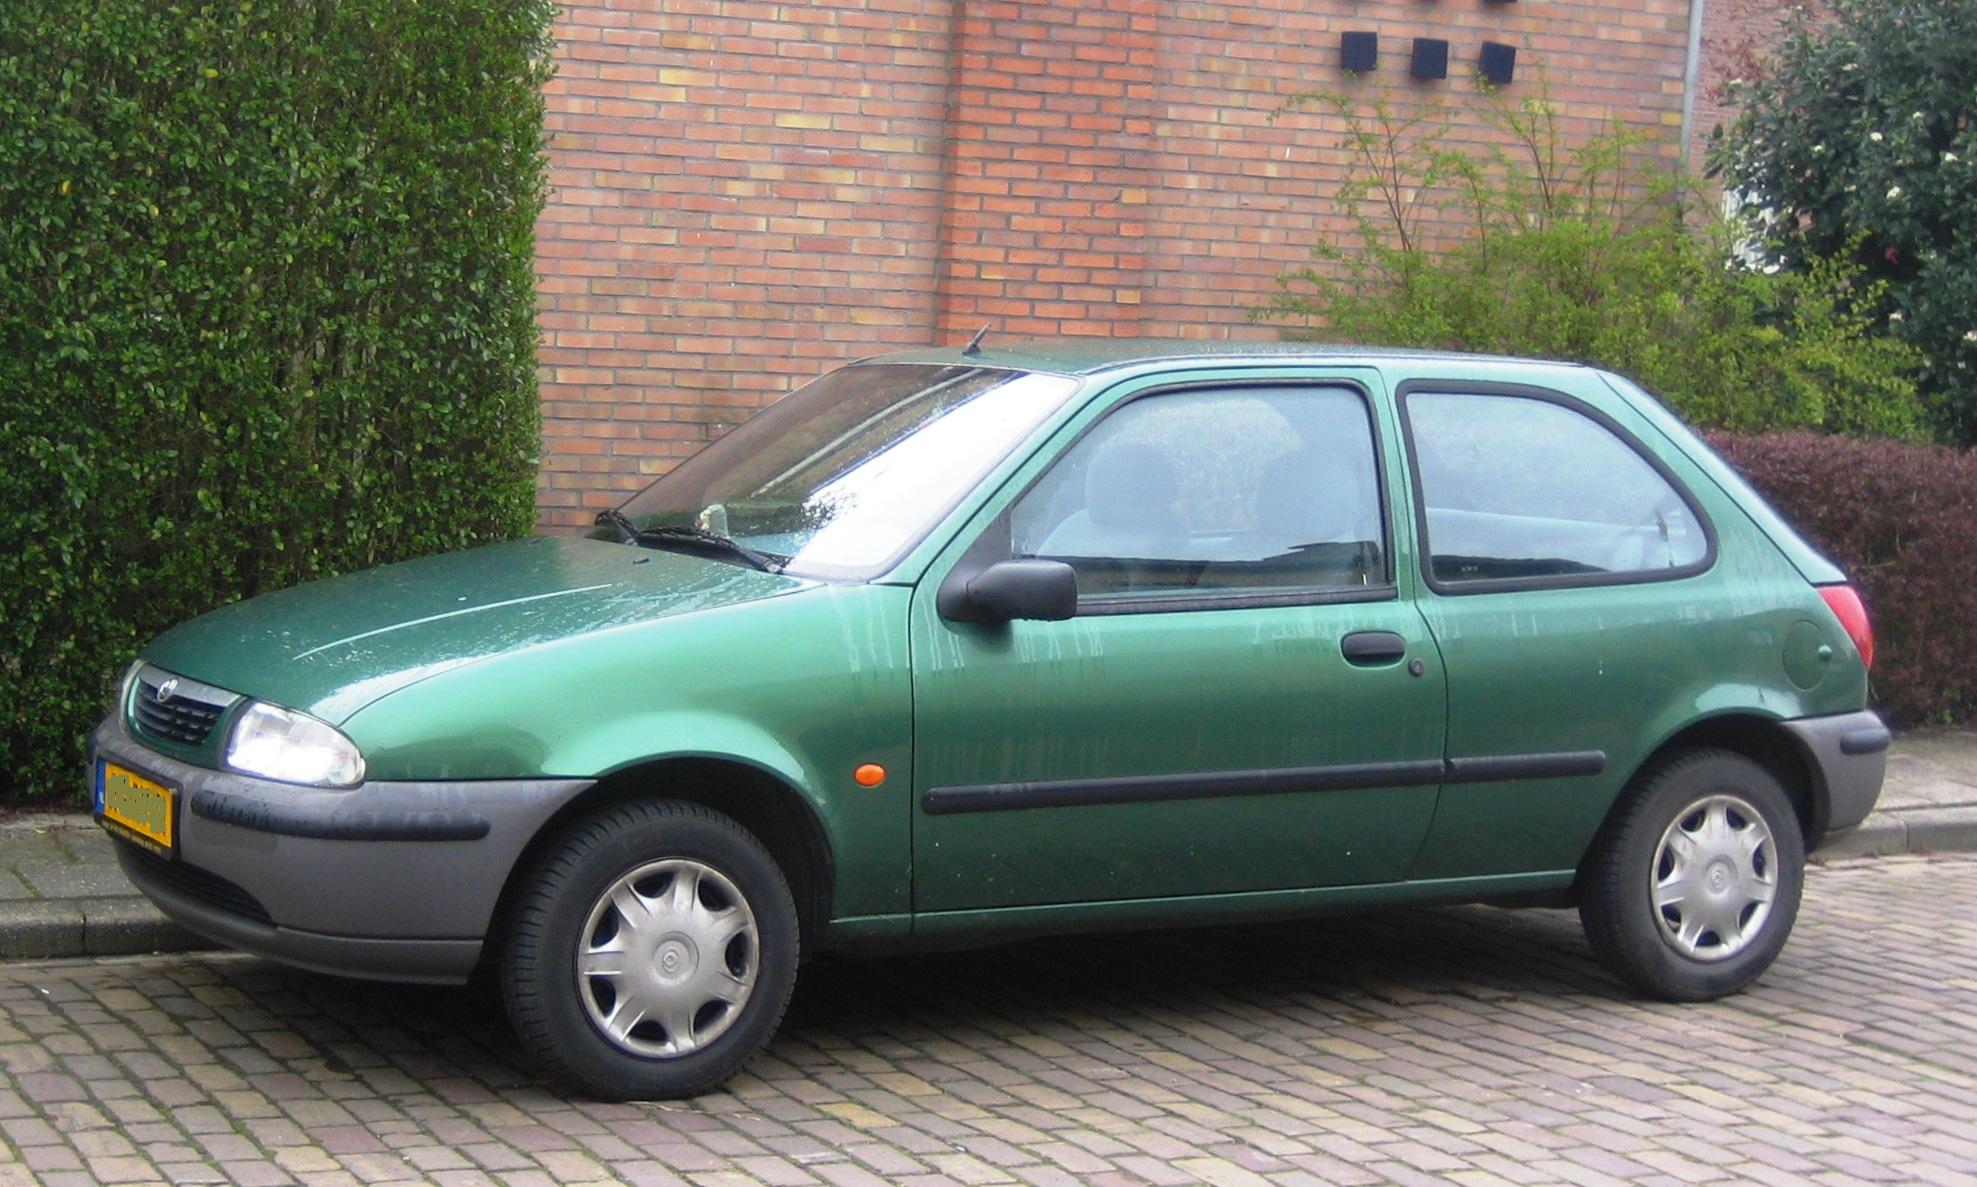 Mazda 121 1999: Review, Amazing Pictures and Images – Look at the car